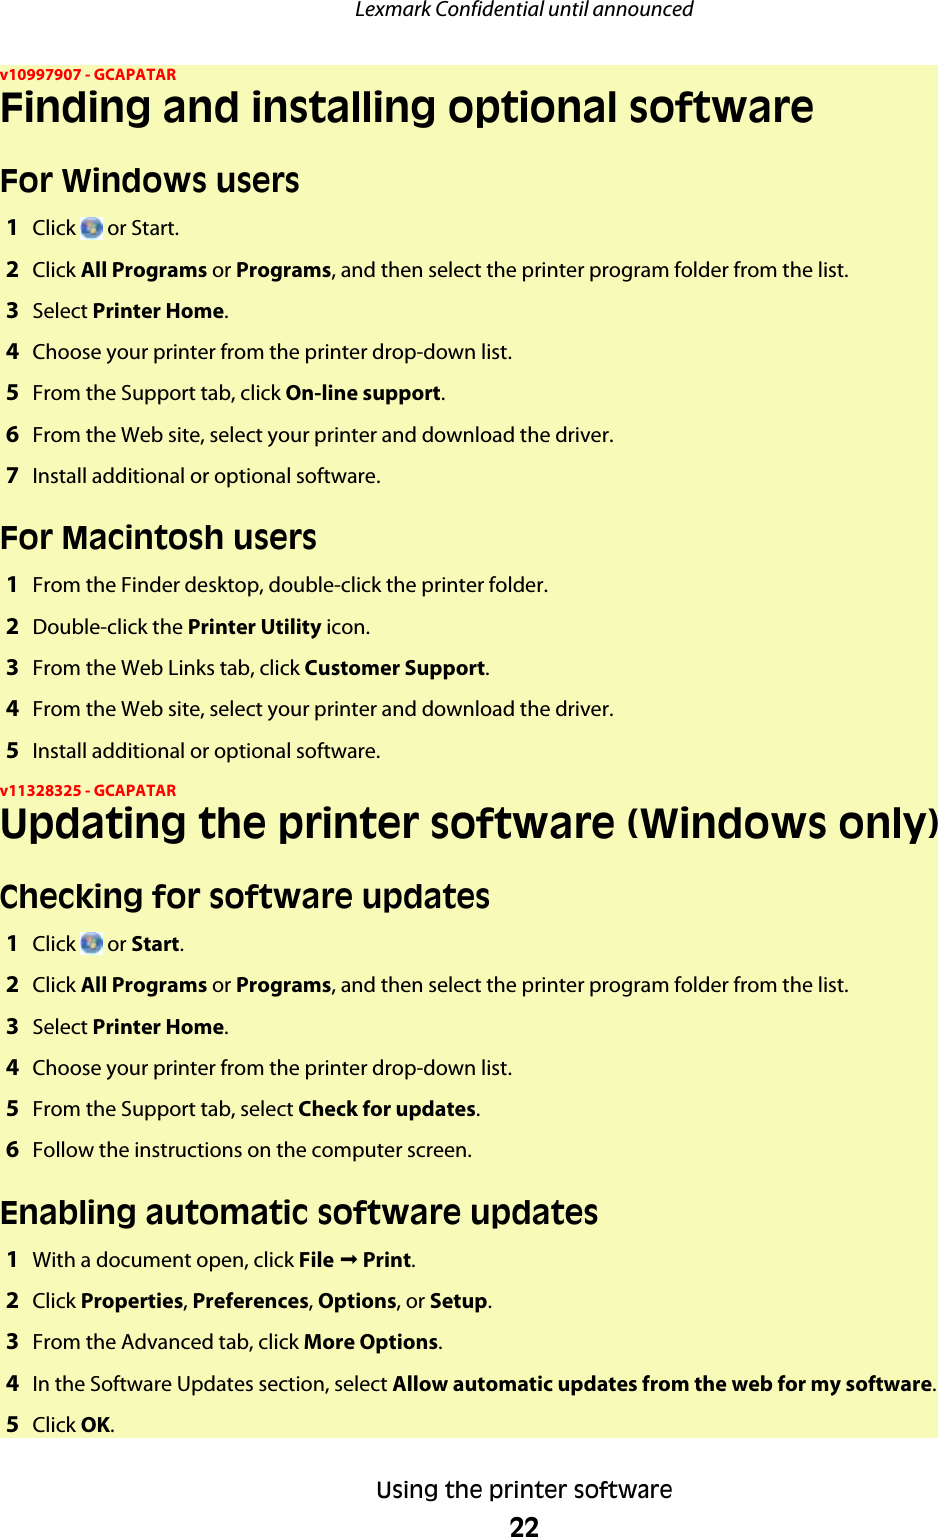 v10997907 - GCAPATARFinding and installing optional softwareFor Windows users1Click   or Start.2Click All Programs or Programs, and then select the printer program folder from the list.3Select Printer Home.4Choose your printer from the printer drop-down list.5From the Support tab, click On-line support.6From the Web site, select your printer and download the driver.7Install additional or optional software.For Macintosh users1From the Finder desktop, double-click the printer folder.2Double-click the Printer Utility icon.3From the Web Links tab, click Customer Support.4From the Web site, select your printer and download the driver.5Install additional or optional software.v11328325 - GCAPATARUpdating the printer software (Windows only)Checking for software updates1Click   or Start.2Click All Programs or Programs, and then select the printer program folder from the list.3Select Printer Home.4Choose your printer from the printer drop-down list.5From the Support tab, select Check for updates.6Follow the instructions on the computer screen.Enabling automatic software updates1With a document open, click File ª Print.2Click Properties, Preferences, Options, or Setup.3From the Advanced tab, click More Options.4In the Software Updates section, select Allow automatic updates from the web for my software.5Click OK.Lexmark Confidential until announcedUsing the printer software22